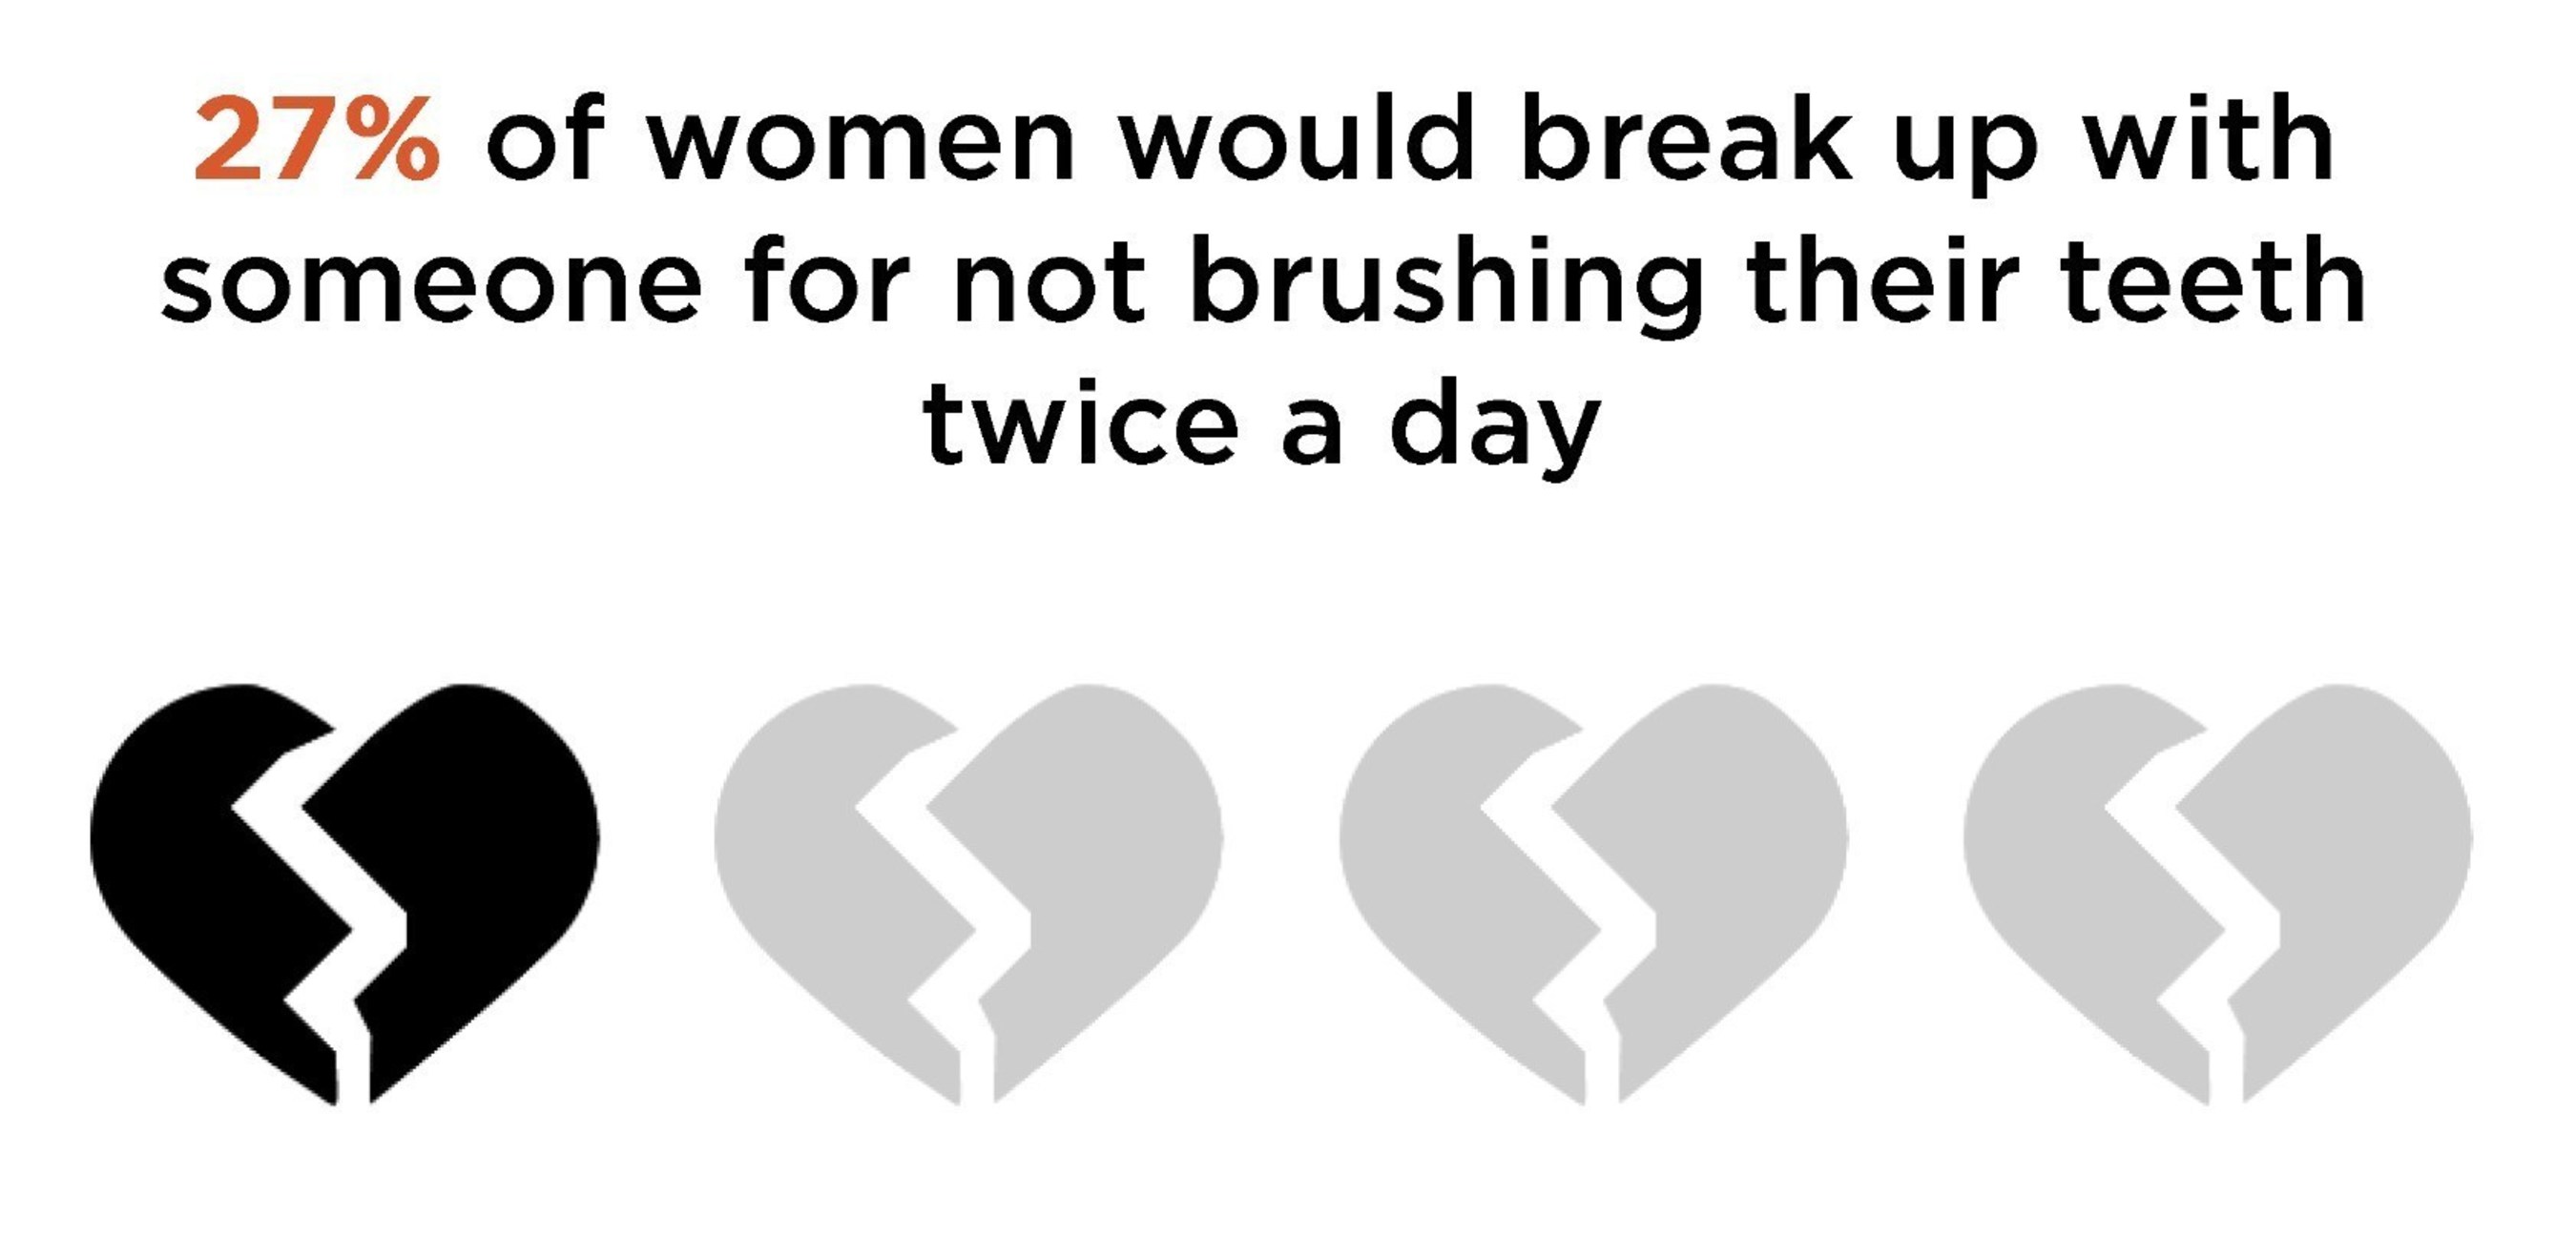 Women say they'd break up with someone for not brushing.